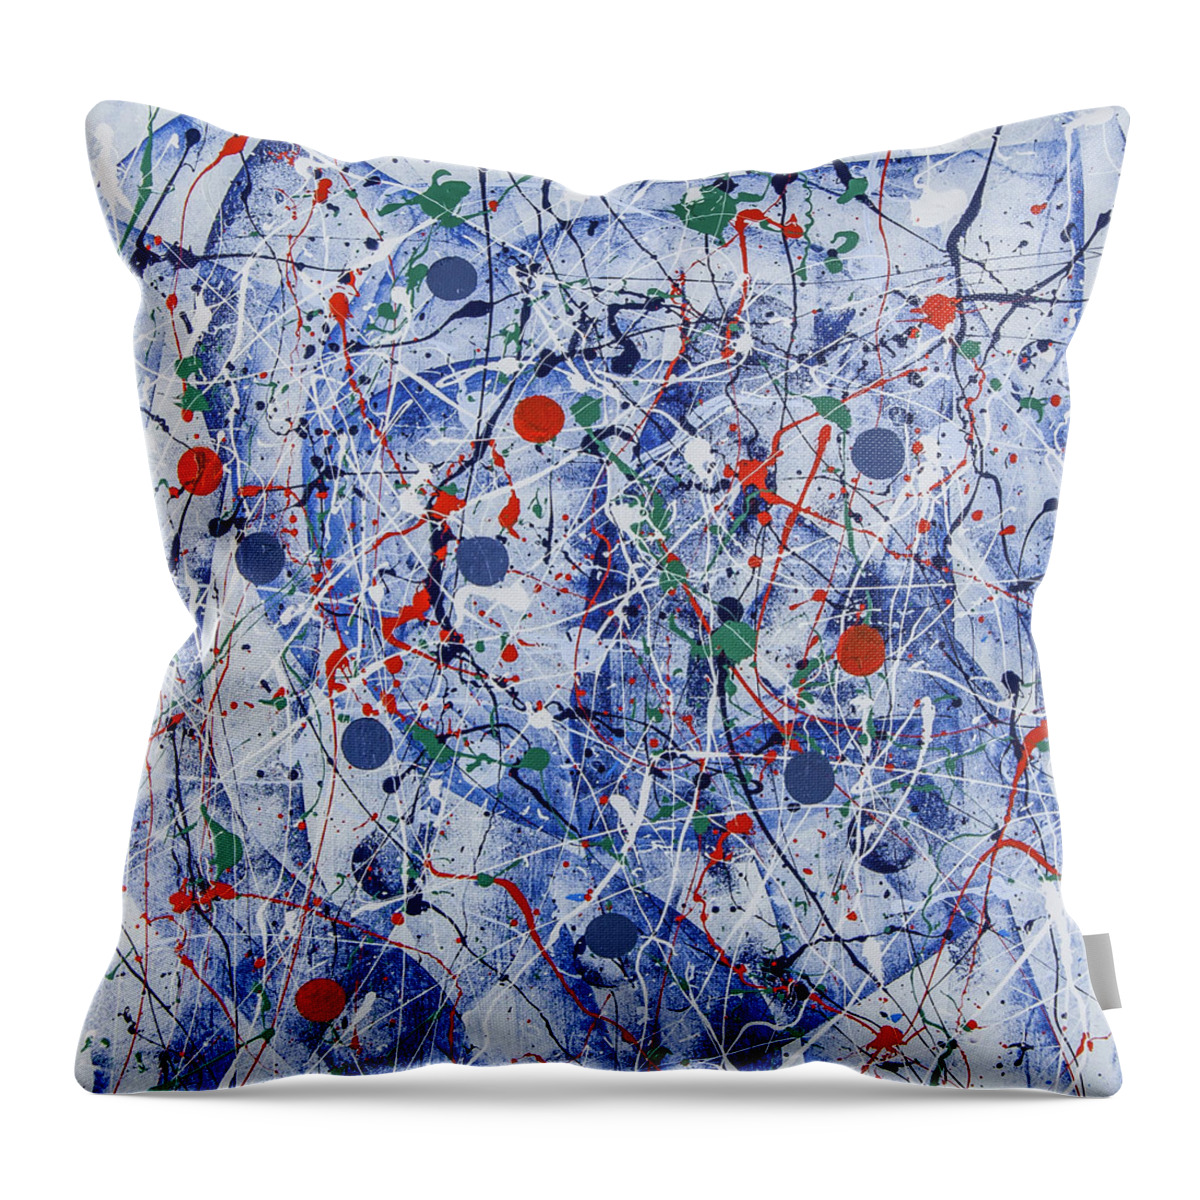 Abstract Throw Pillow featuring the painting Icy Universe by Maxim Komissarchik